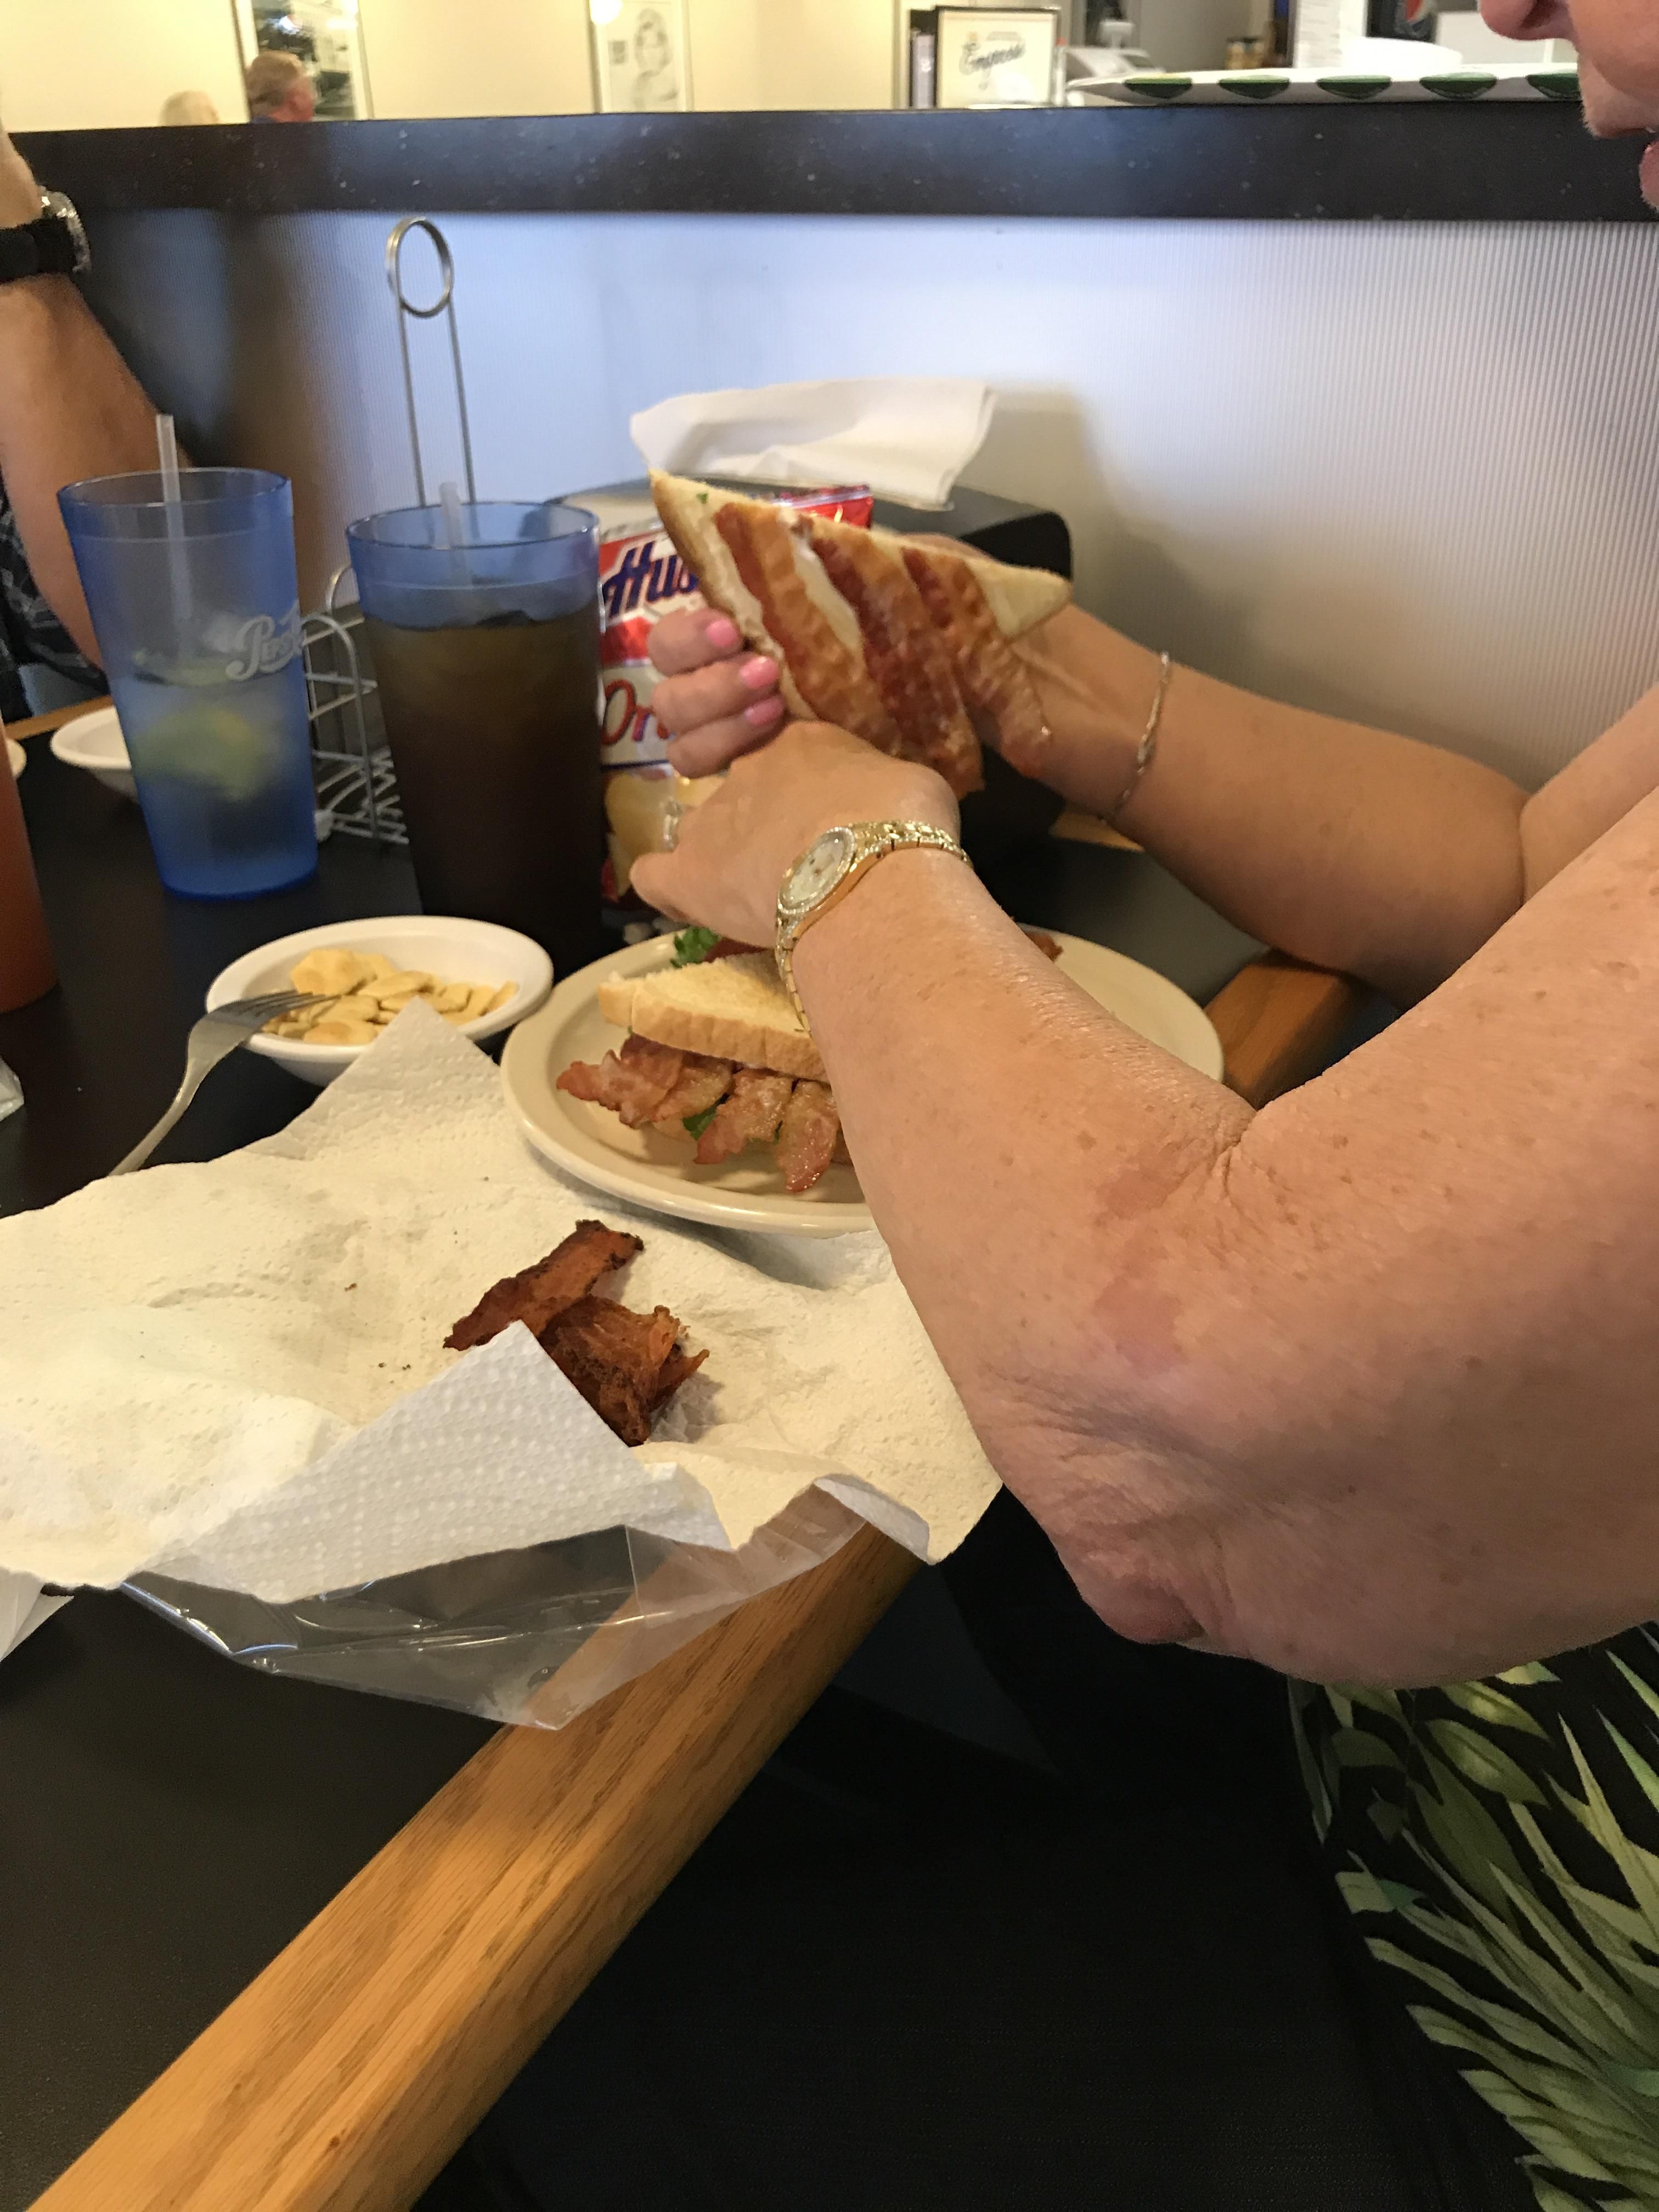 My grandma packs her own bacon because she feels like the restaurants never put enough on her BLTs....